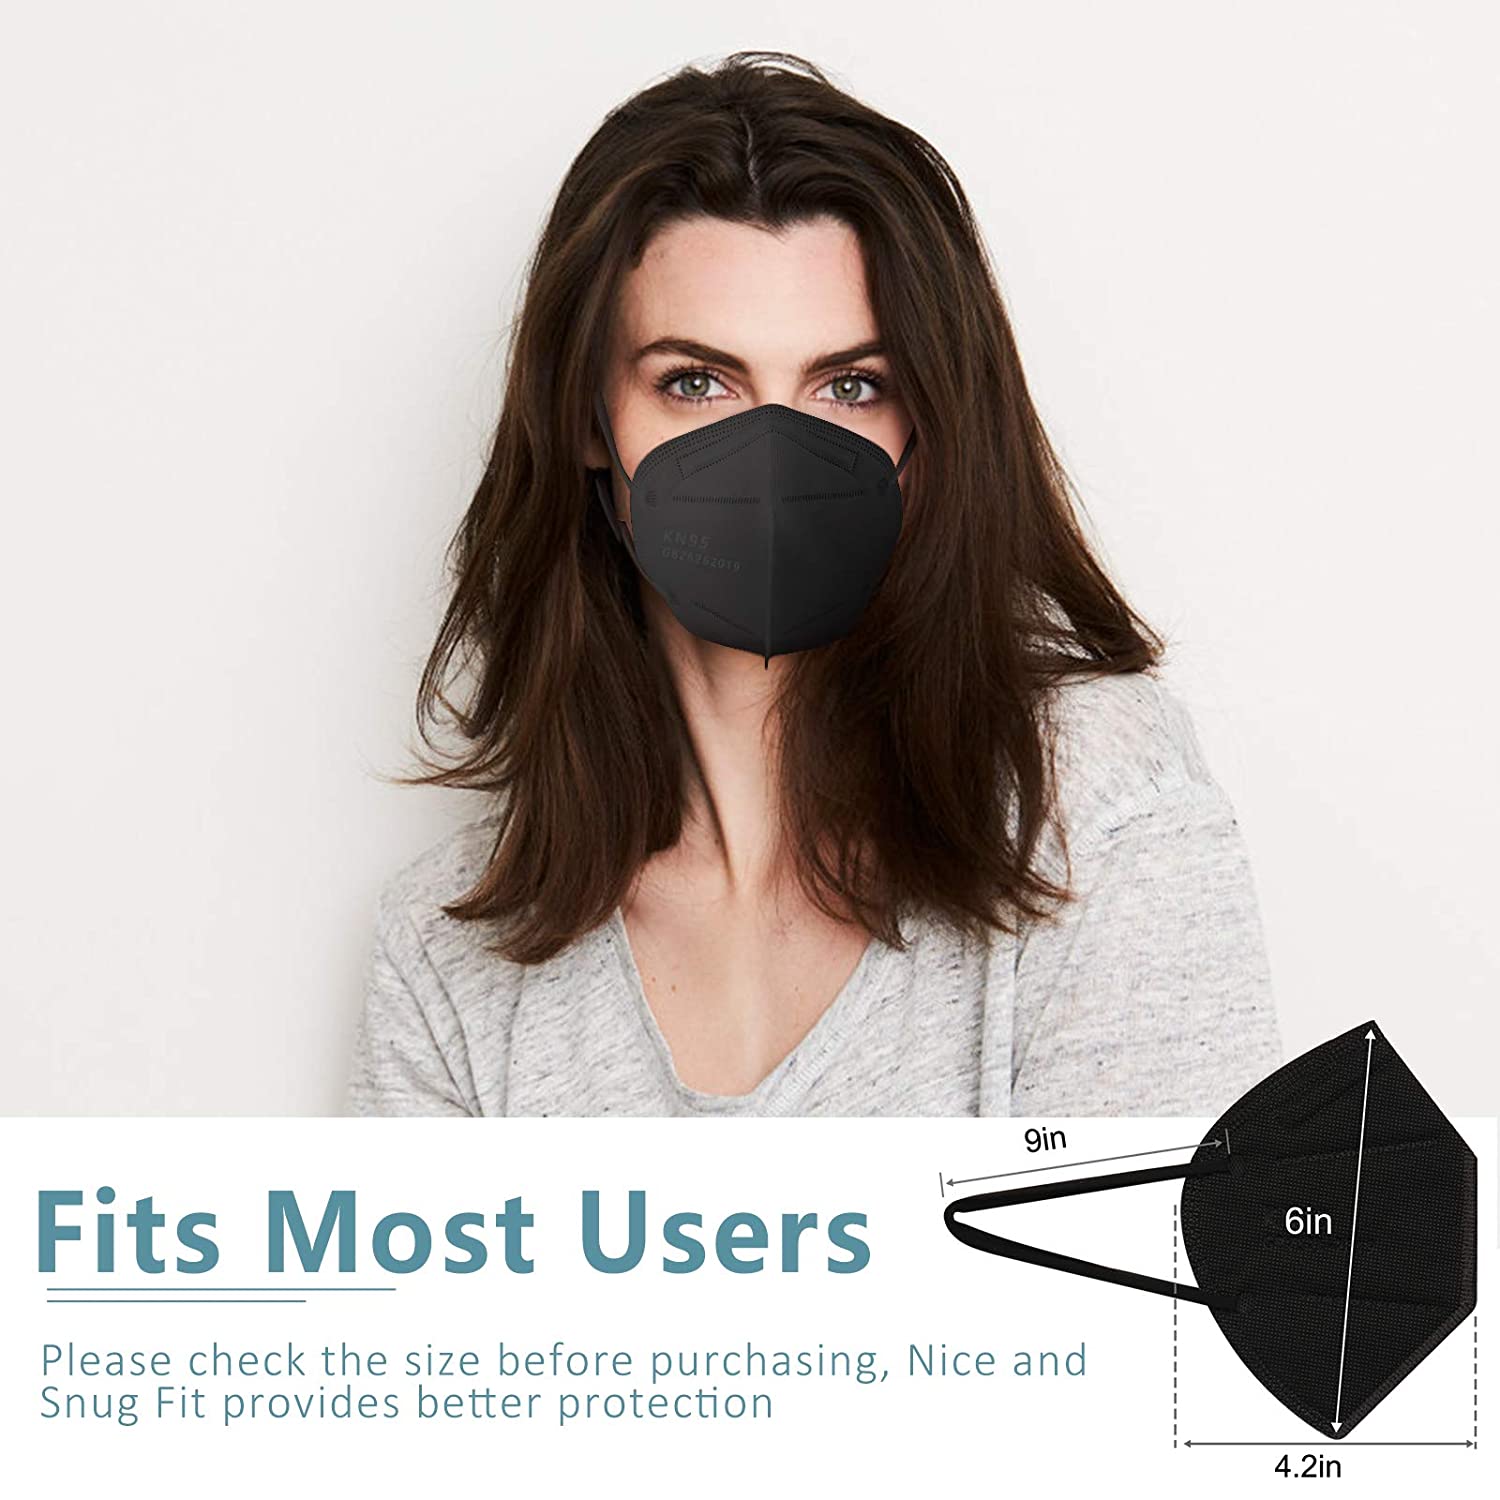 KN95 Face Mask 20 PCs, 5-Ply Cup Dust Safety Masks, Breathable Protection Masks Against PM2.5 for Men & Women Filter Efficiency≥95%, Black